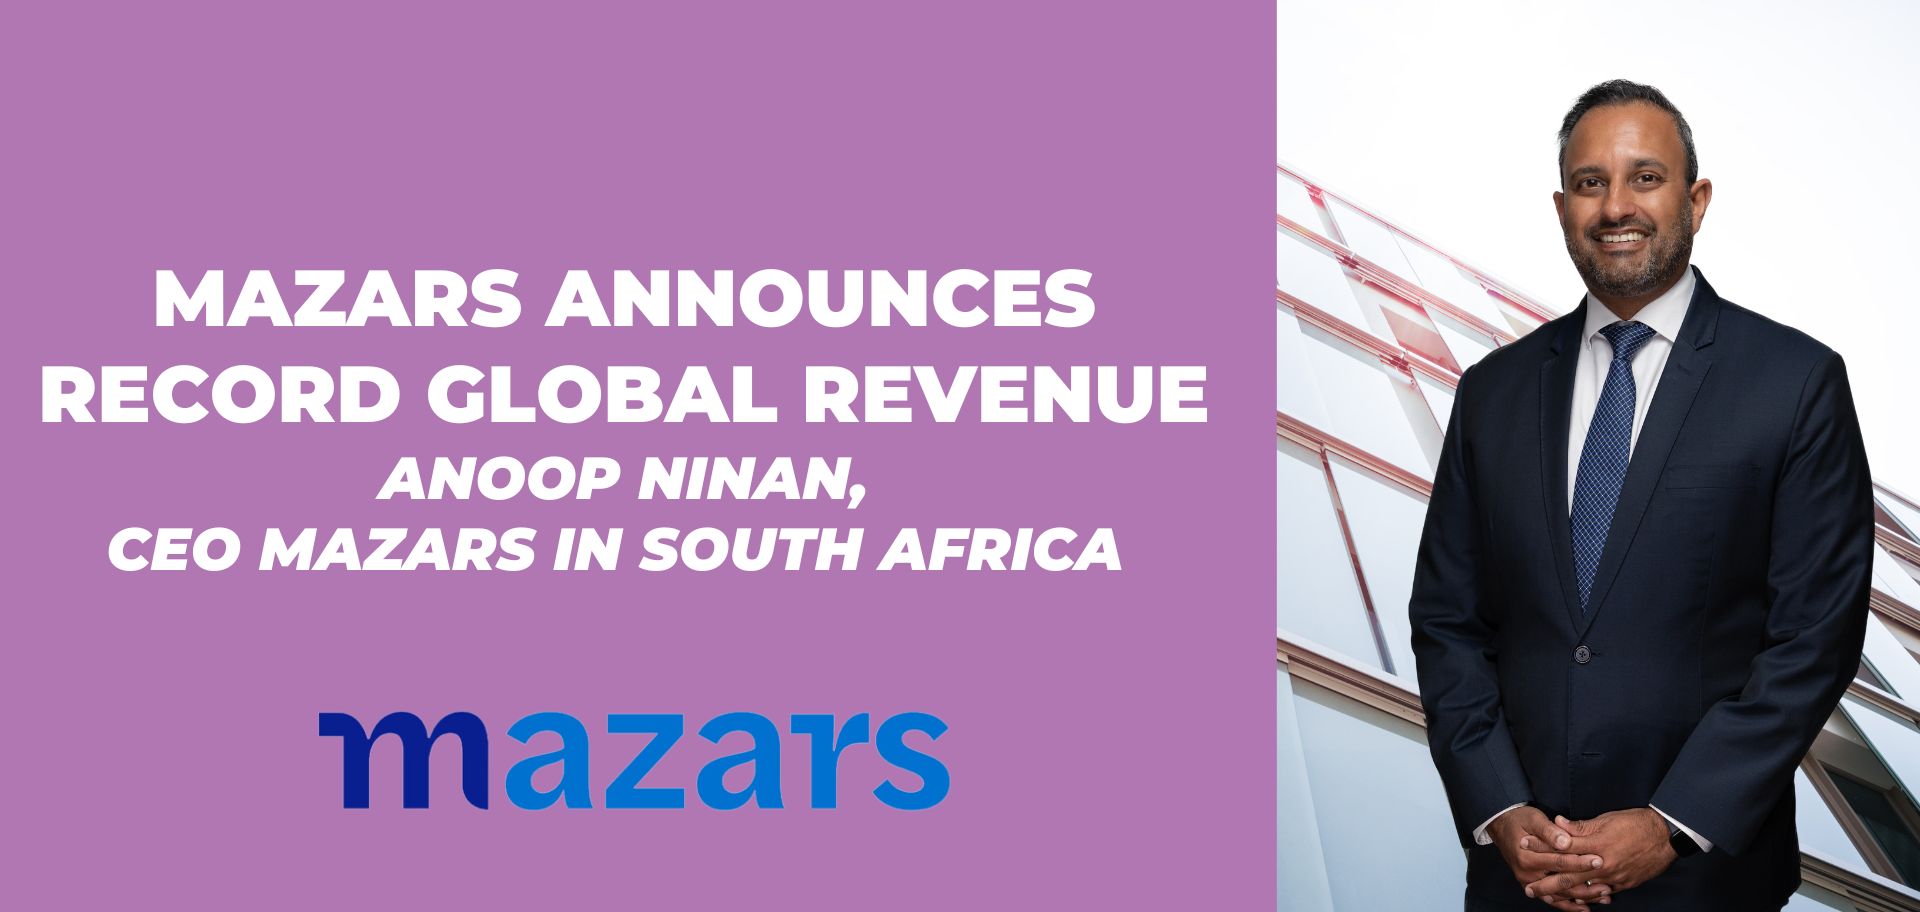 Mazars announces another year of record revenues as it builds global ambition